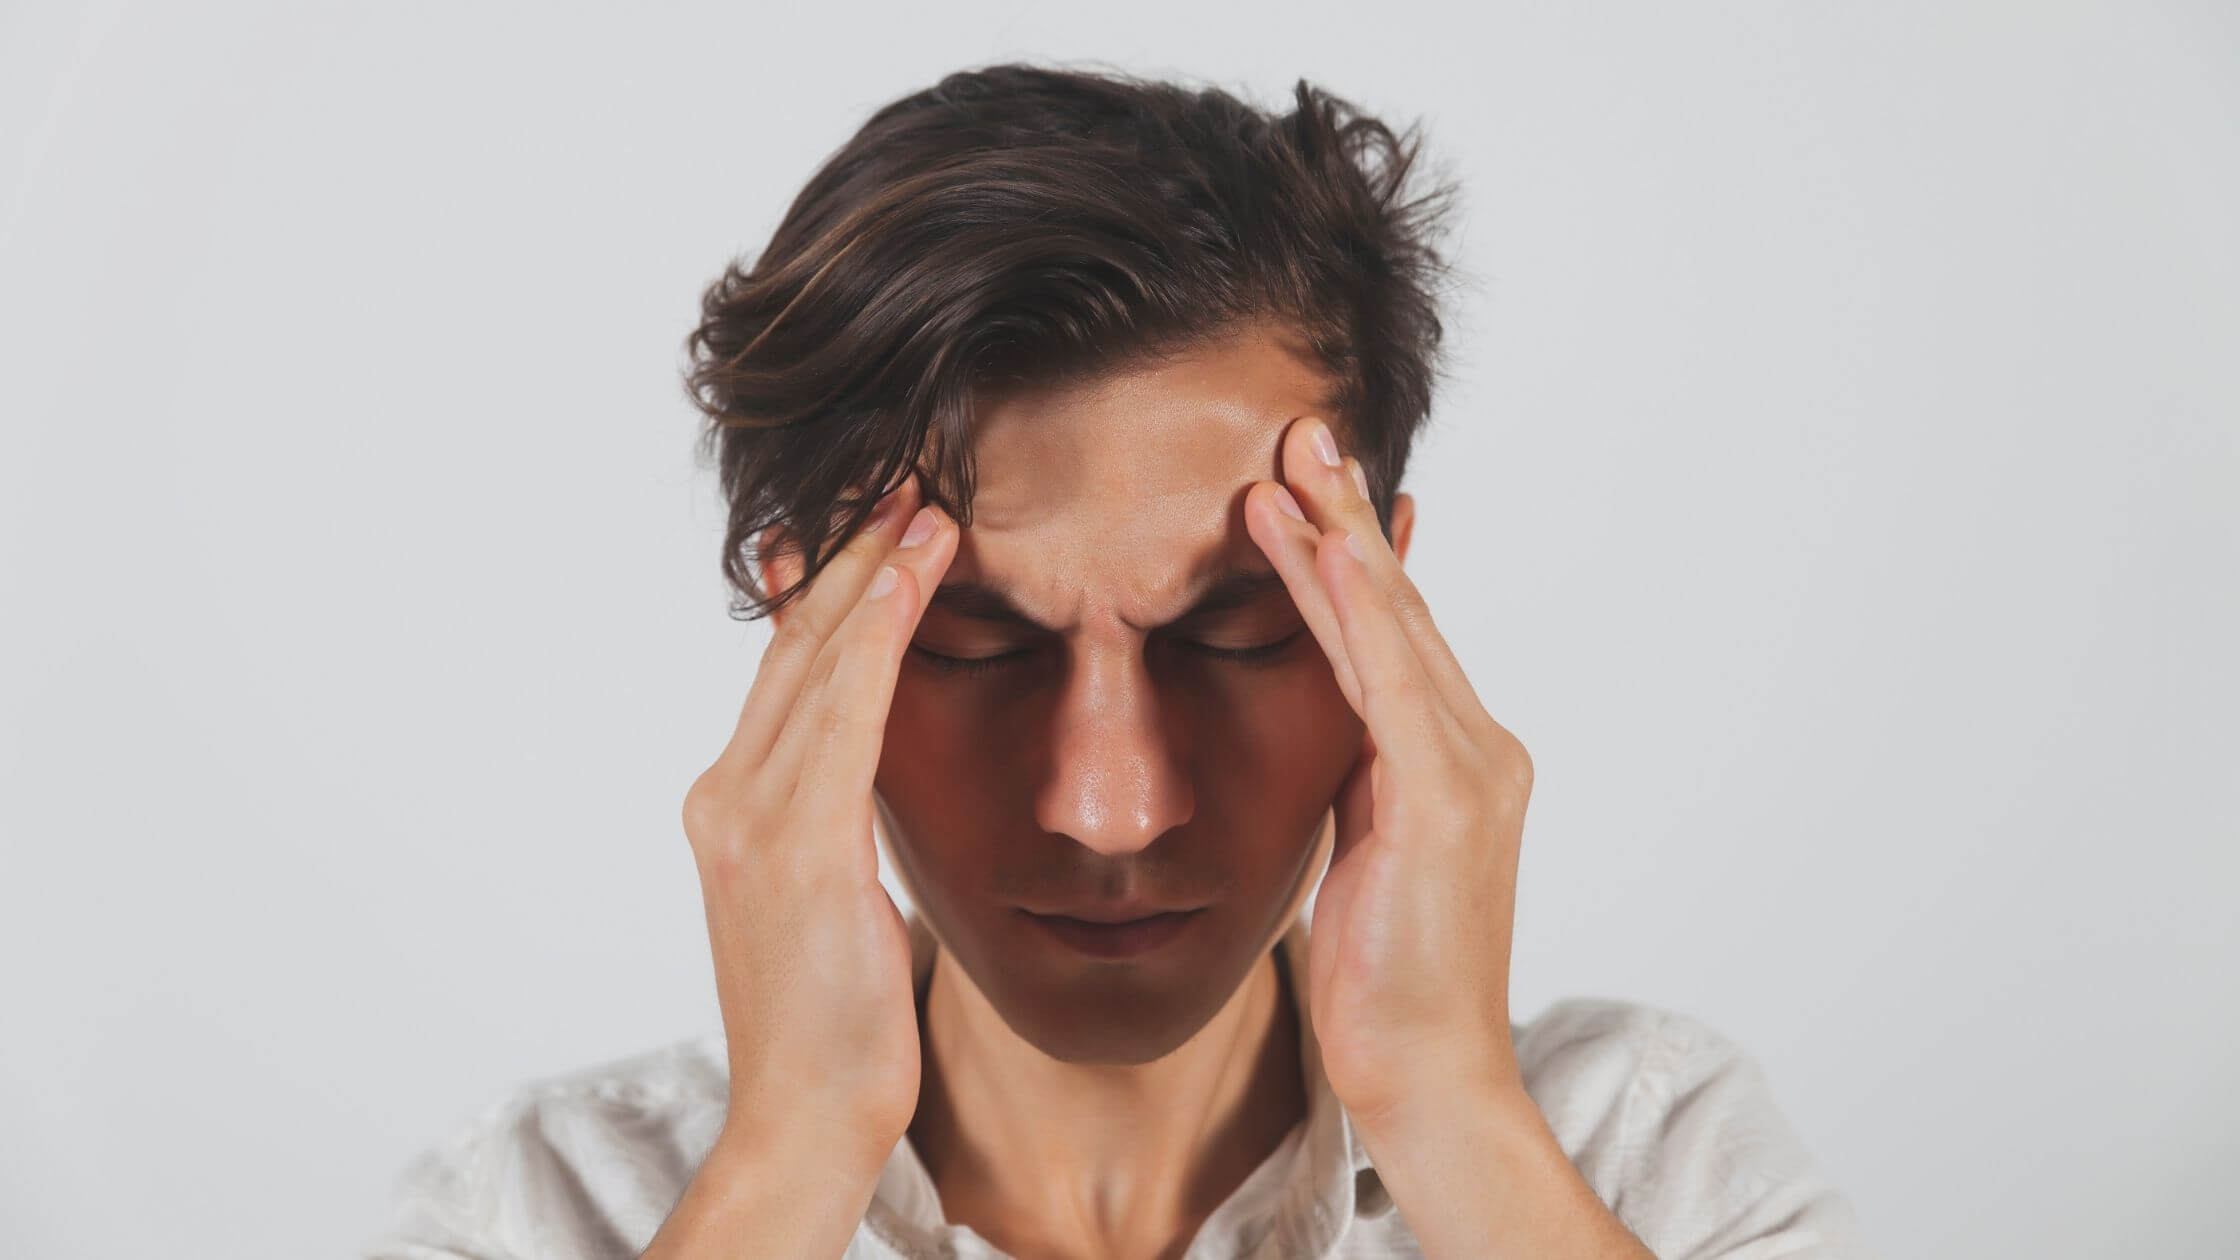 can physio help with headaches?